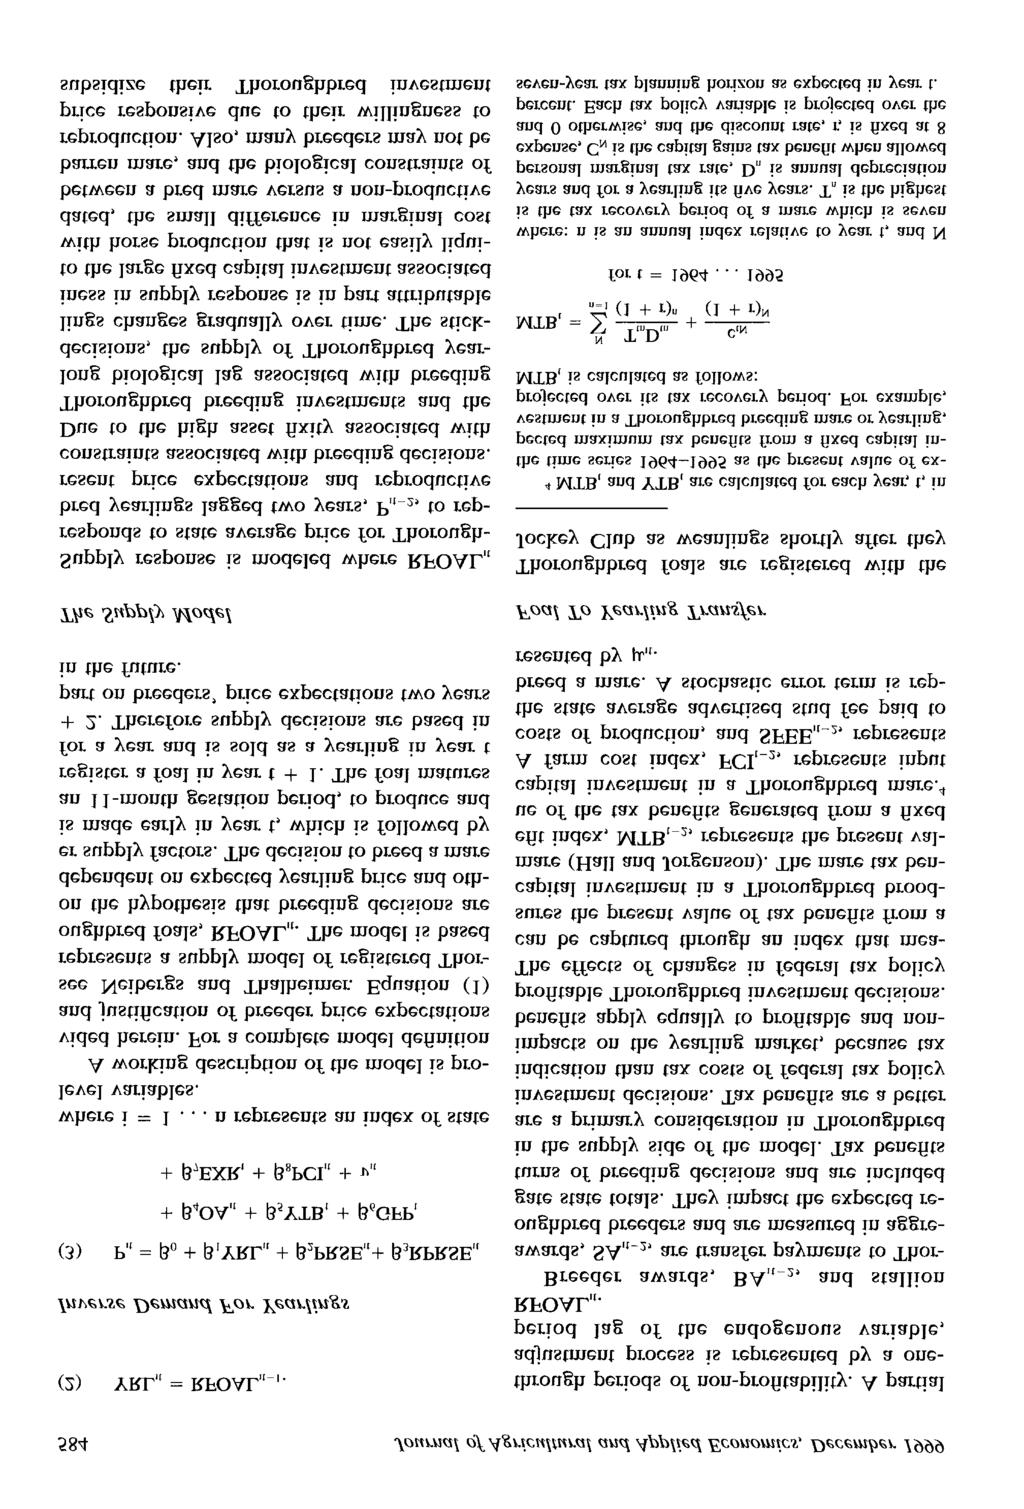 584 Journal of Agricultural and Applied Economics, December 1999 (2) YRL,, = RFOAL,, -I.